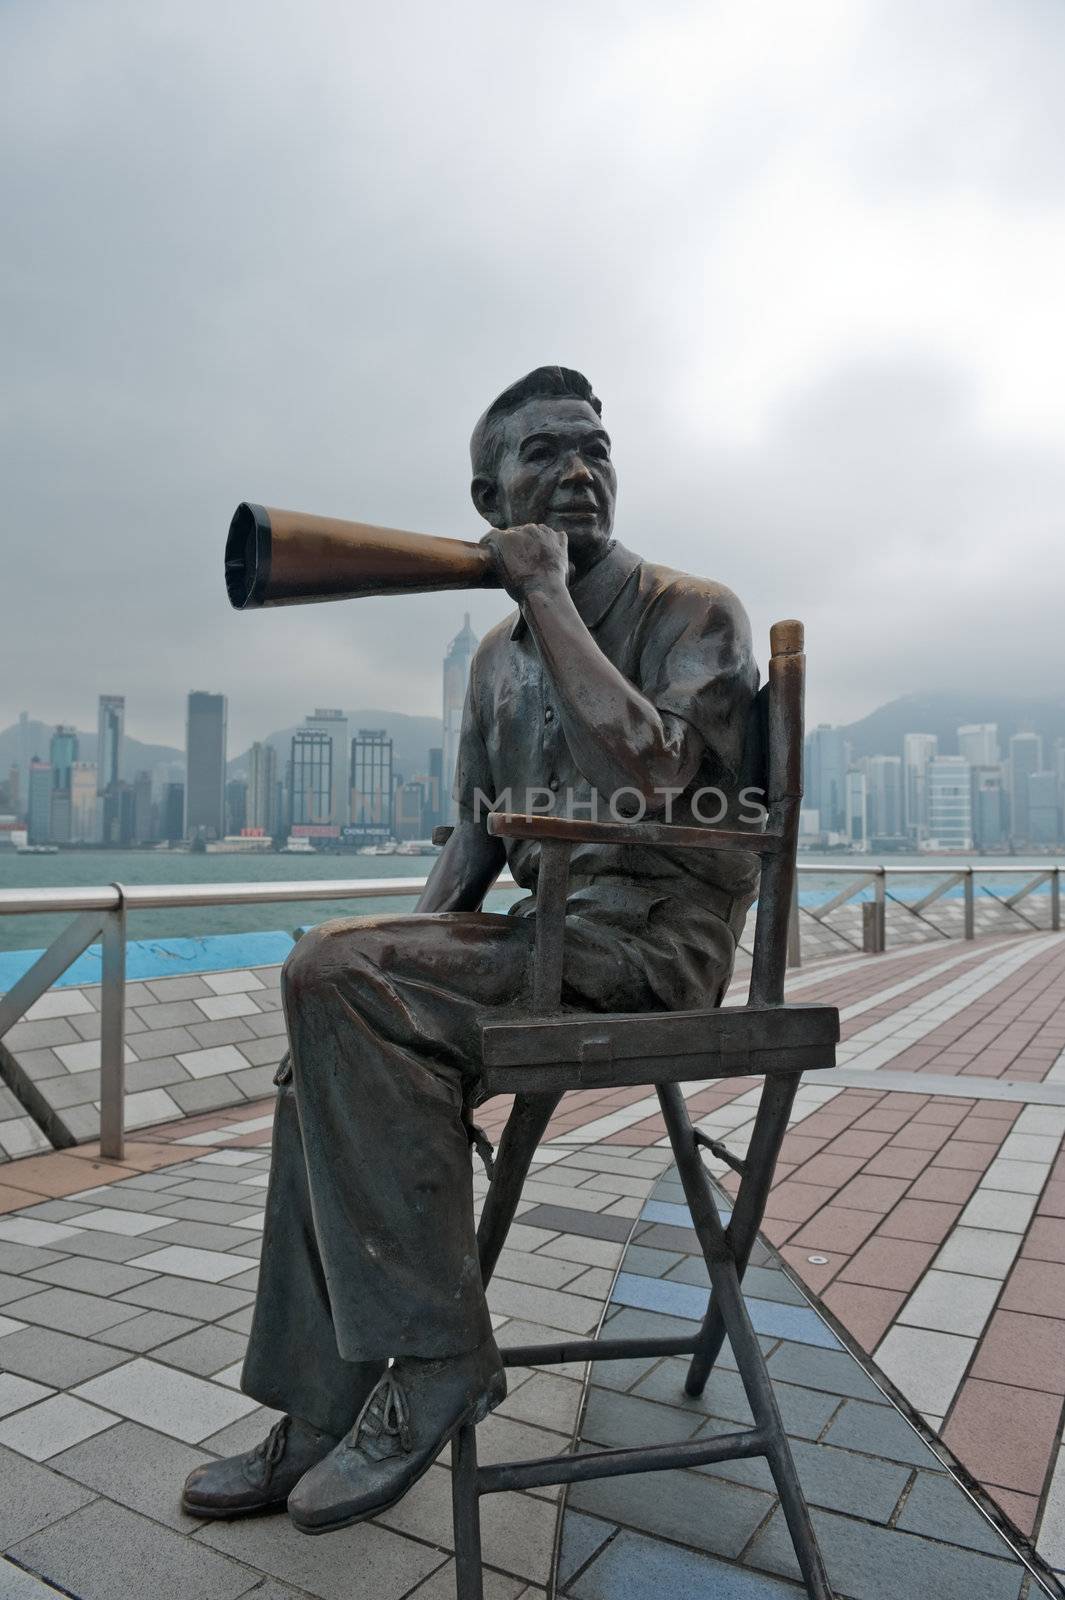 Movie director bronze statue in Avenue of Stars in Hong Kong Kawloon China